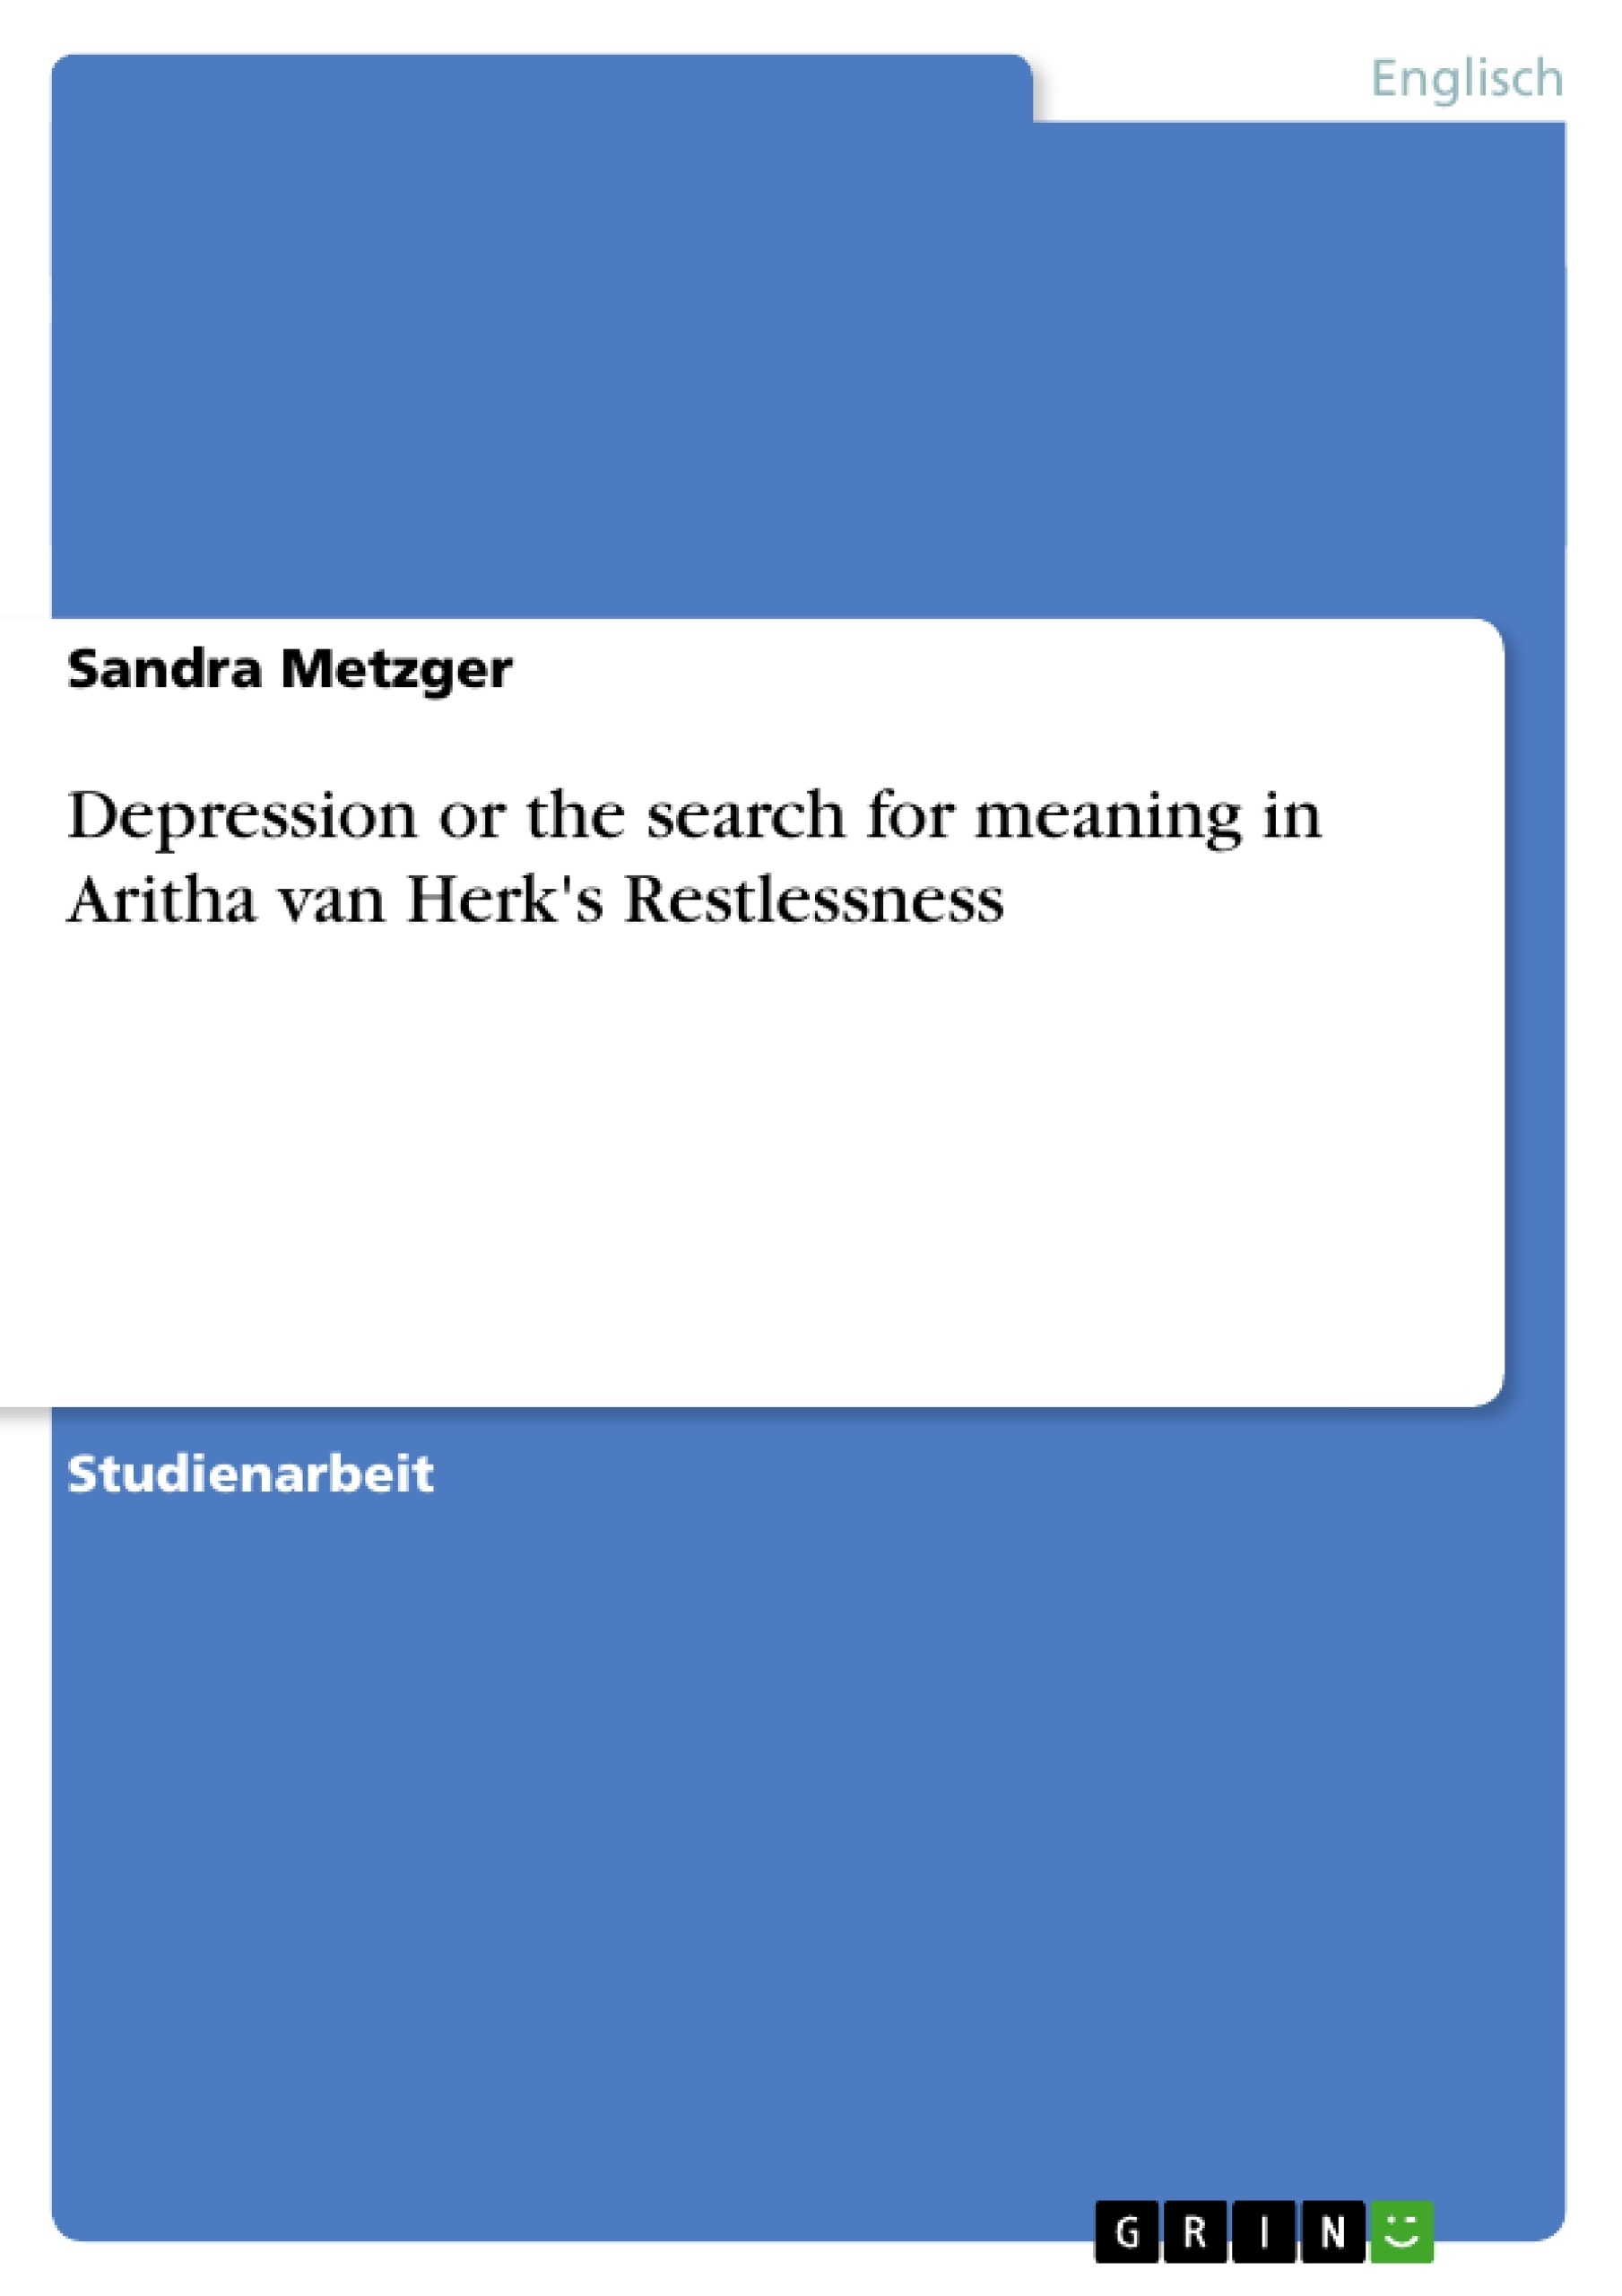 Title: Depression or the search for meaning in Aritha van Herk's Restlessness